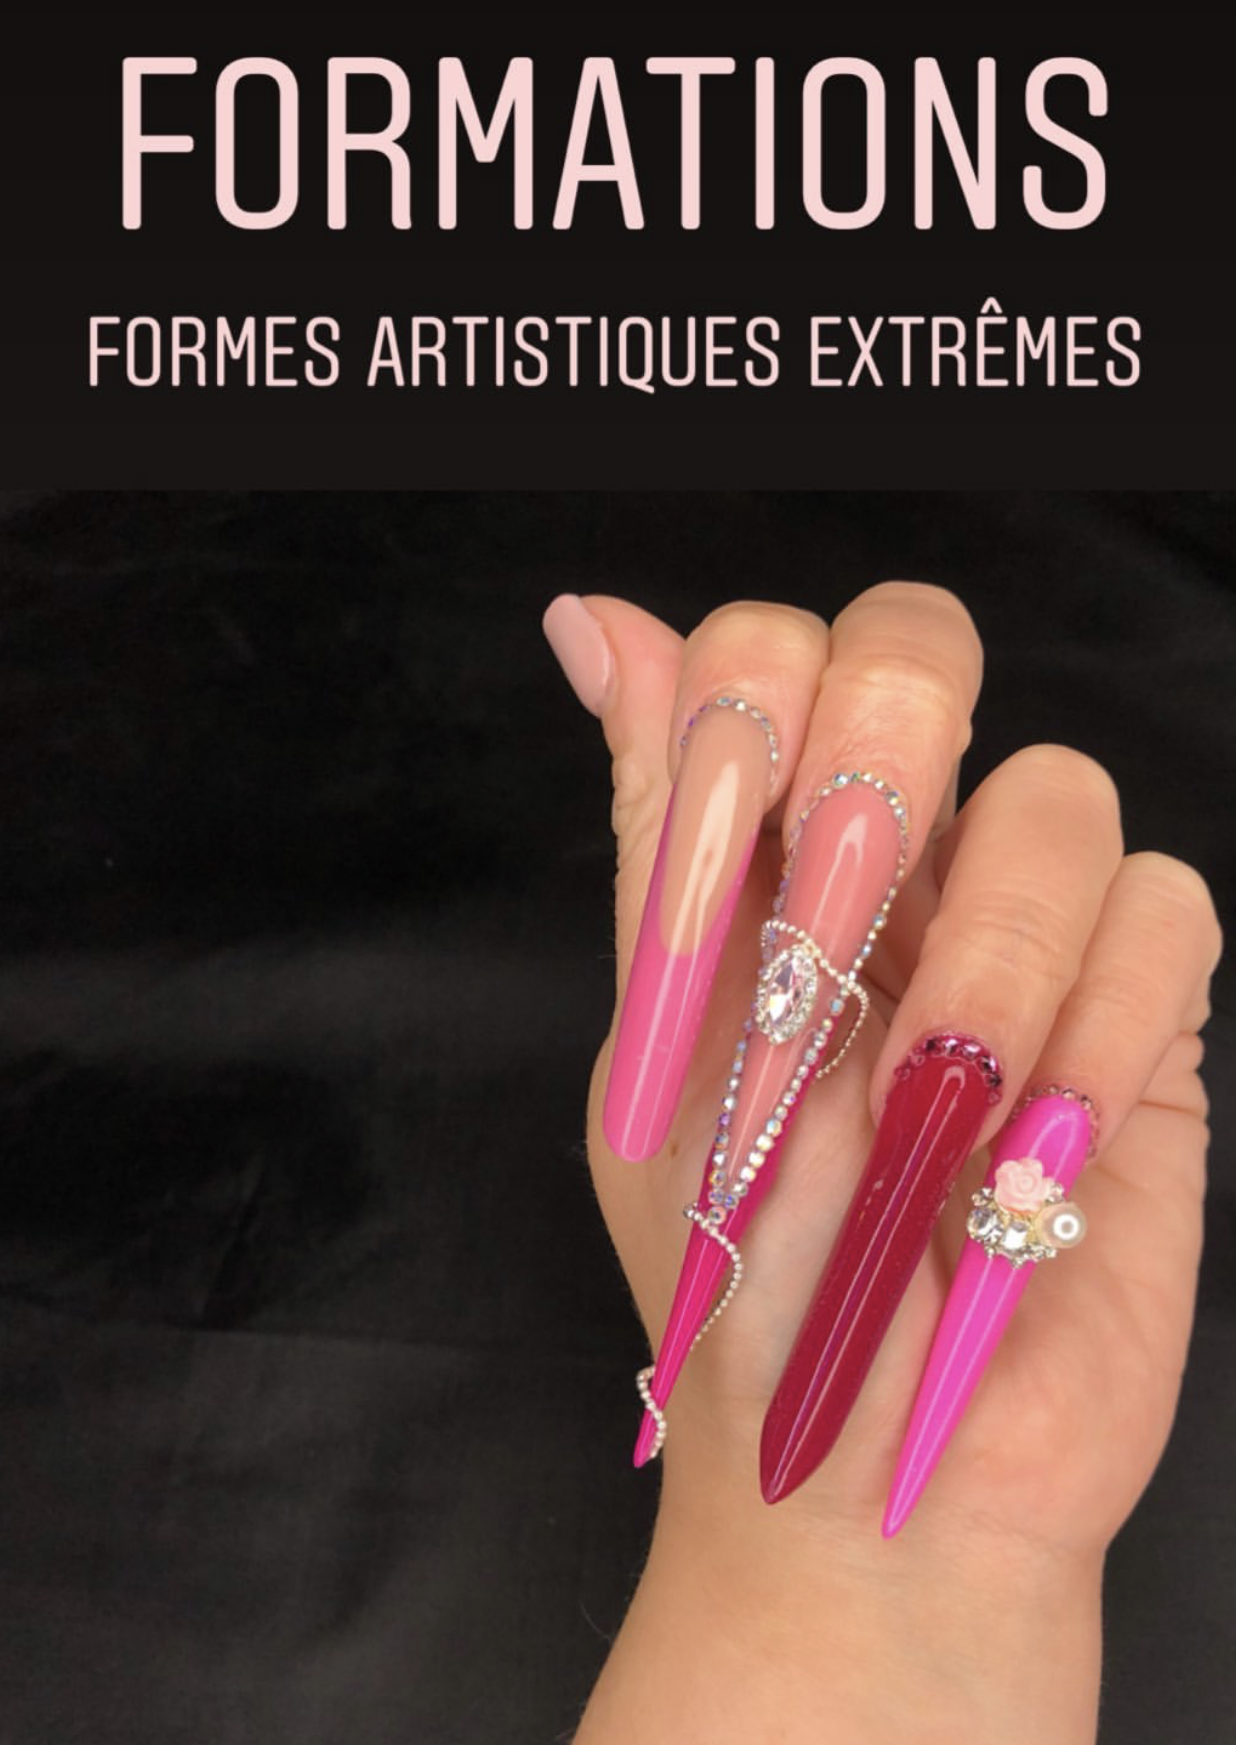 FORMATION FORMES EXTREMES